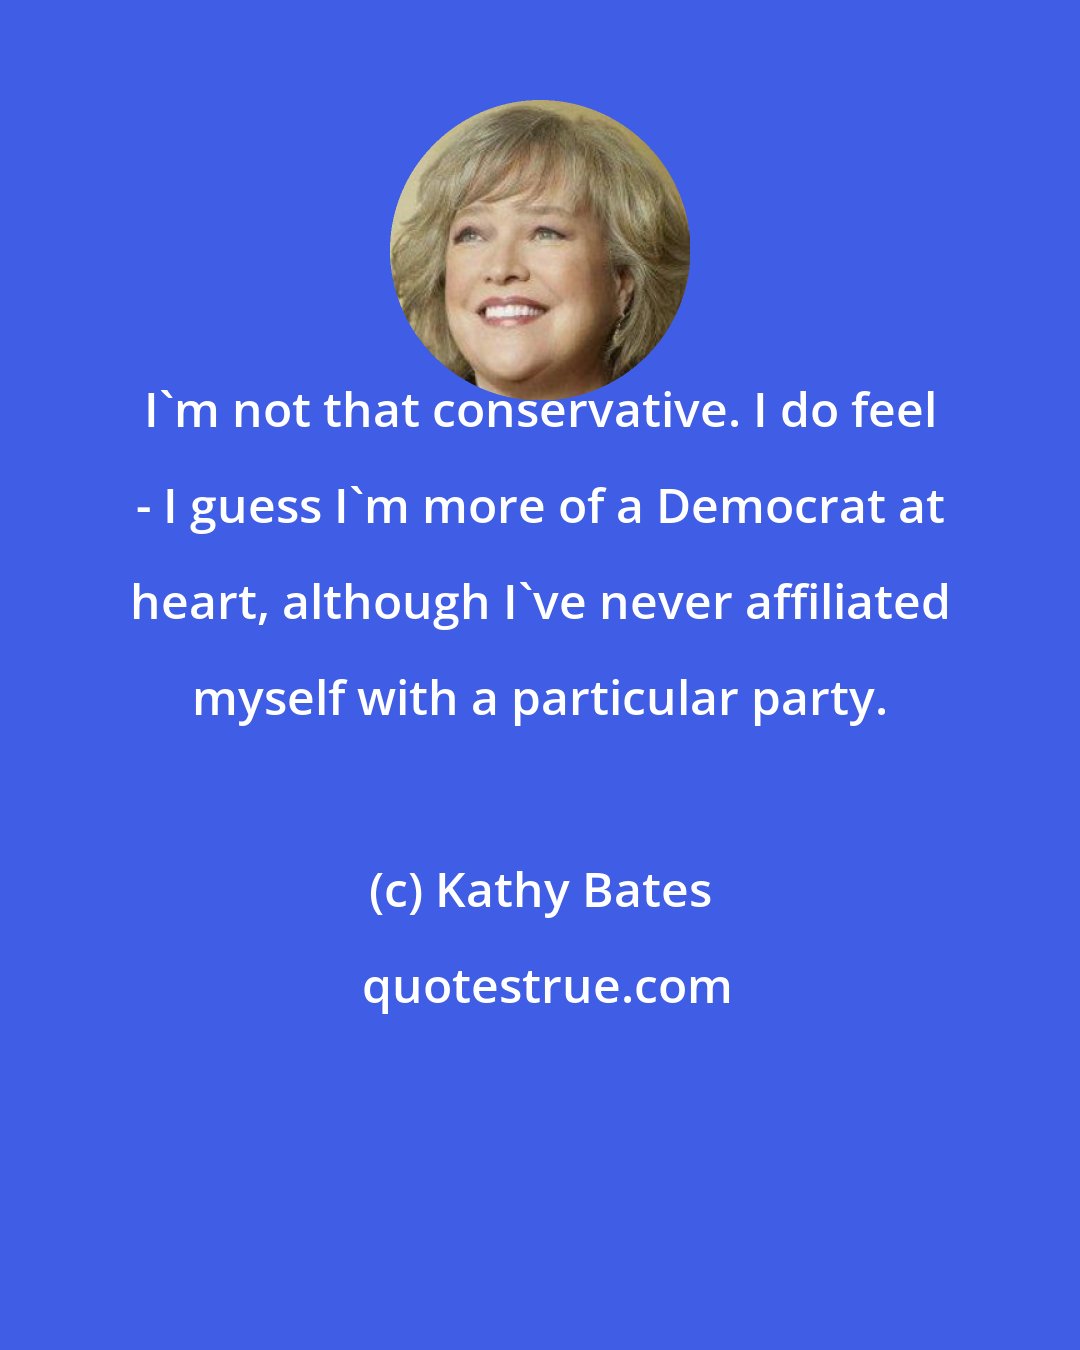 Kathy Bates: I'm not that conservative. I do feel - I guess I'm more of a Democrat at heart, although I've never affiliated myself with a particular party.